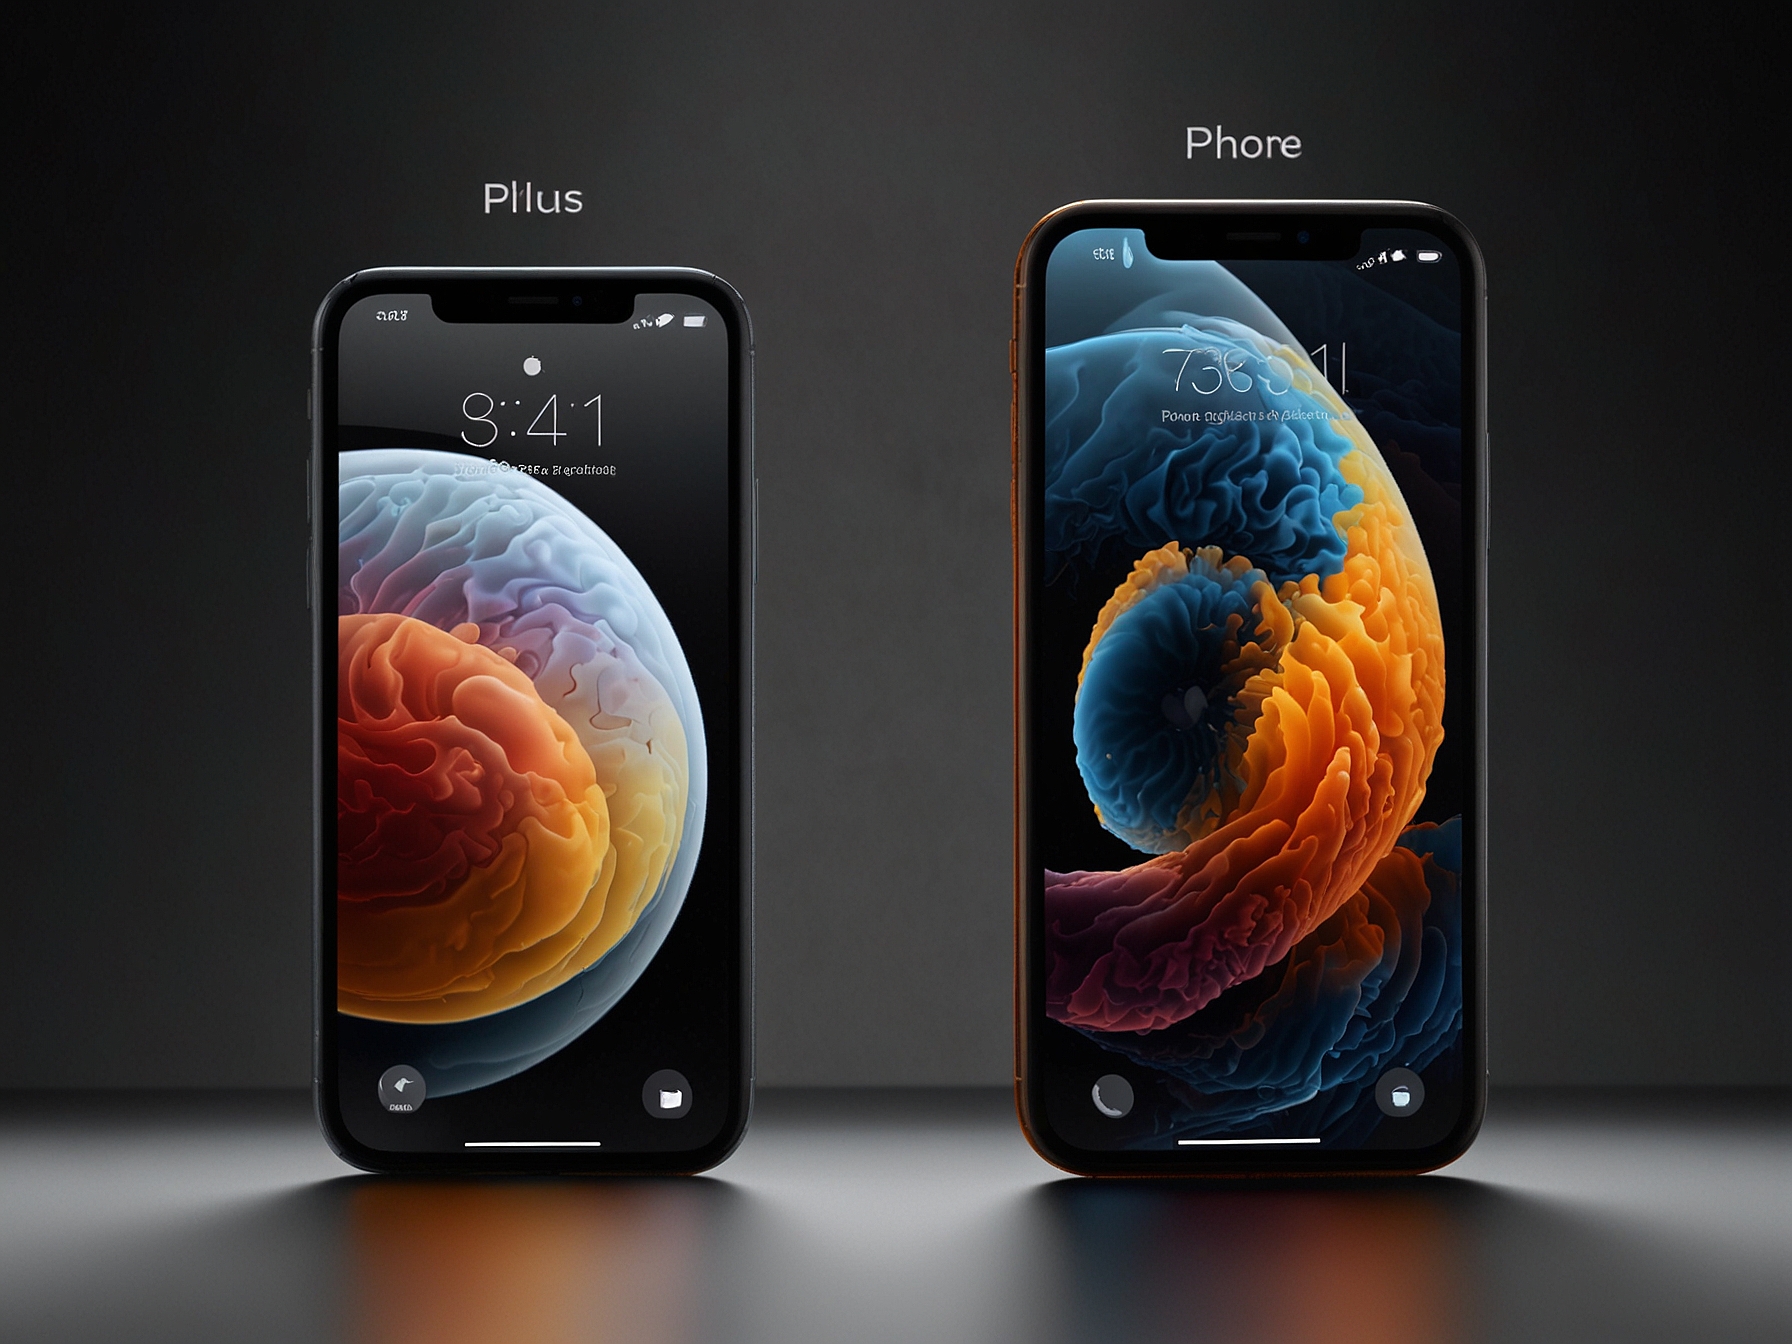 A side-by-side comparison of the iPhone 15's Super Retina XDR display and the iPhone 14 Plus's Liquid Retina HD display, highlighting their advanced features and high-end specifications.